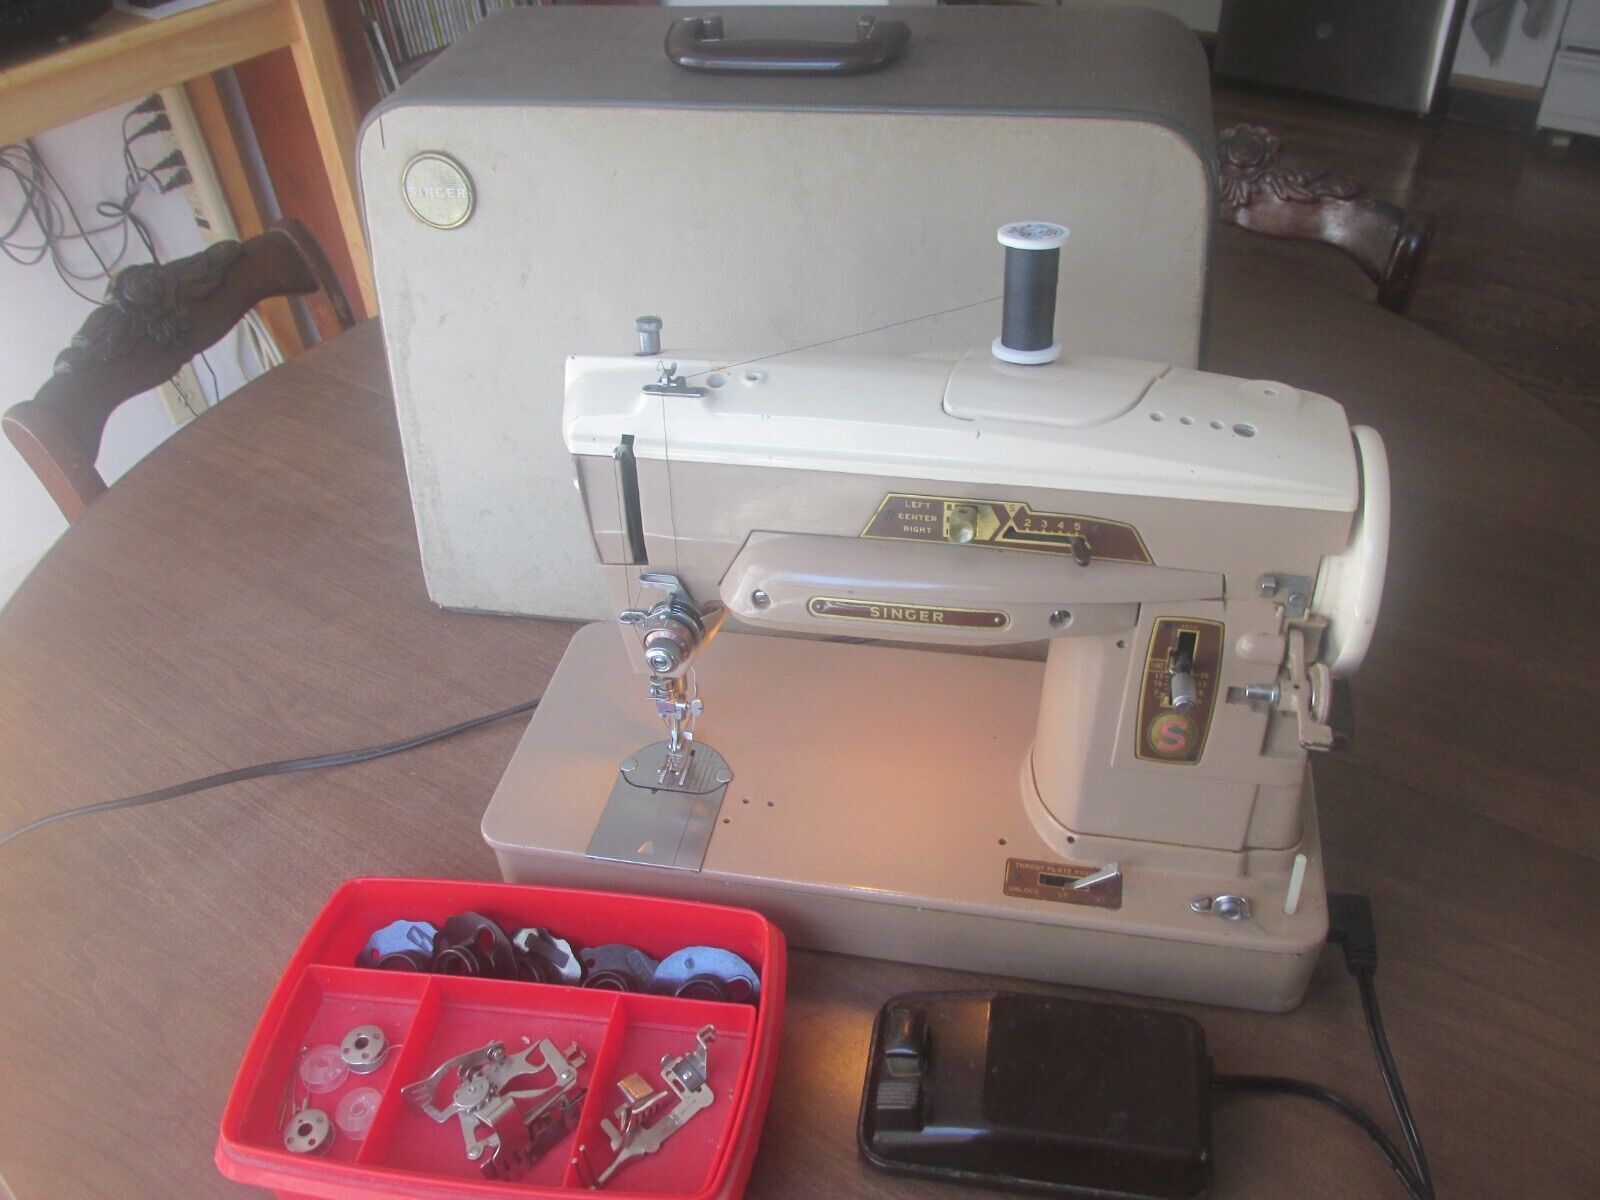 Singer Sewing Machine 403A with Pedal, Case, and Accessories